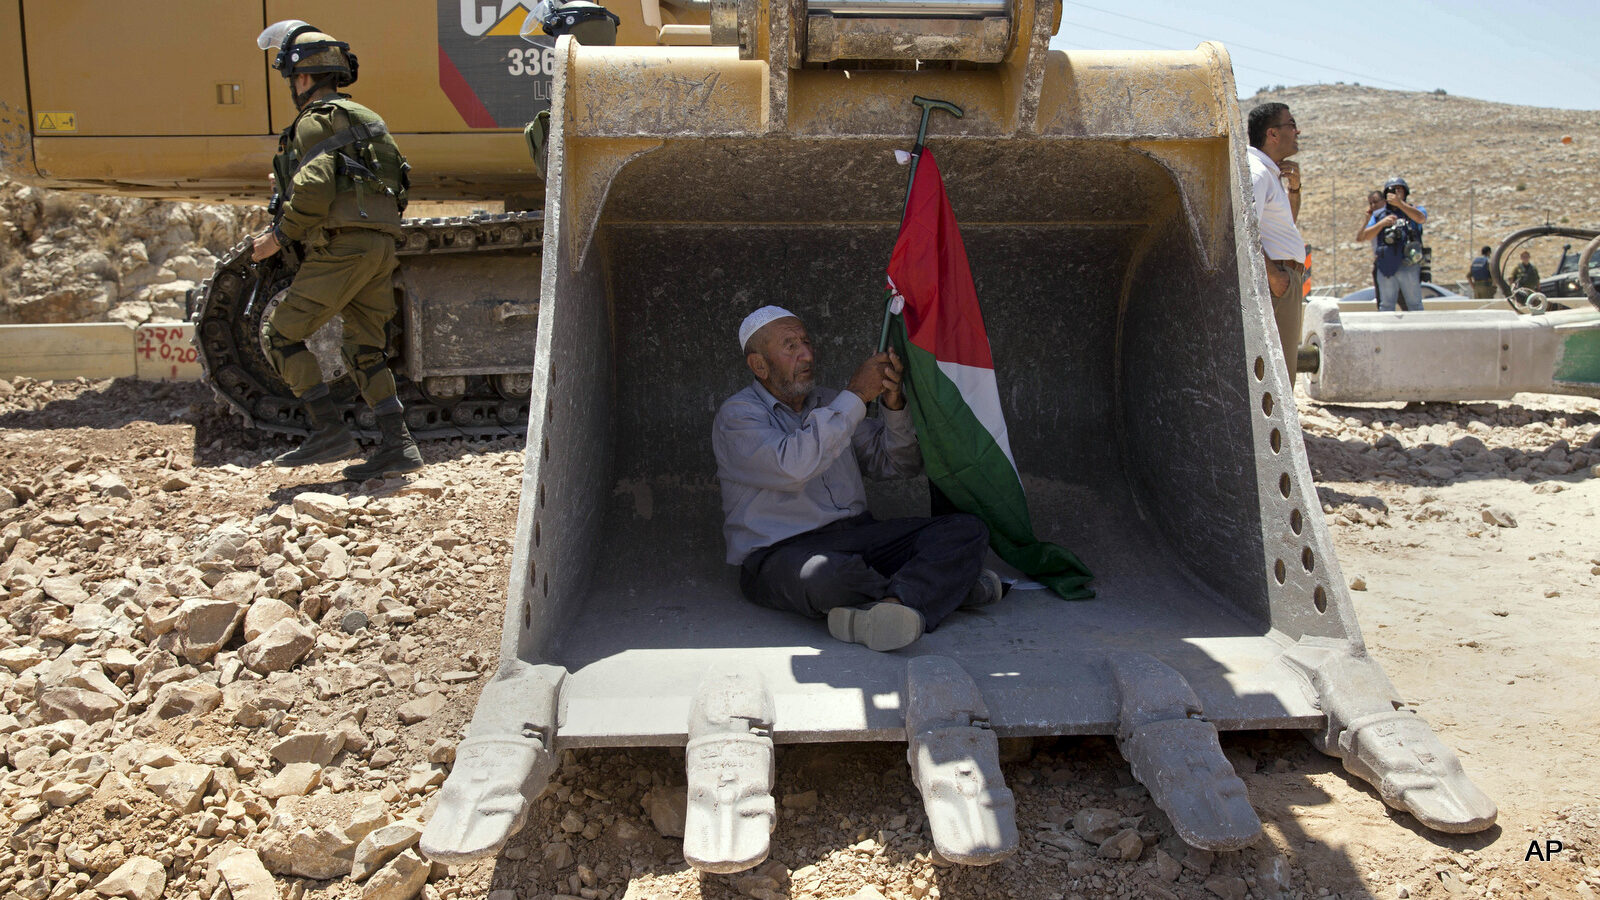 A Palestinian man tries to stop work by an Israeli bulldozer during a protest outside the village of Deir Qaddis, near the West Bank city of Ramallah, Wednesday, July 13, 2016. Dozens of Palestinians demonstrated Wednesday in front of Israeli bulldozers that were bulldozing land outside Deir Qaddis village near Ramallah for an apparent plan to expand a nearby Jewish settlement. The protesters forced the bulldozers to stop, but residents said they resumed work after the protesters left the area.